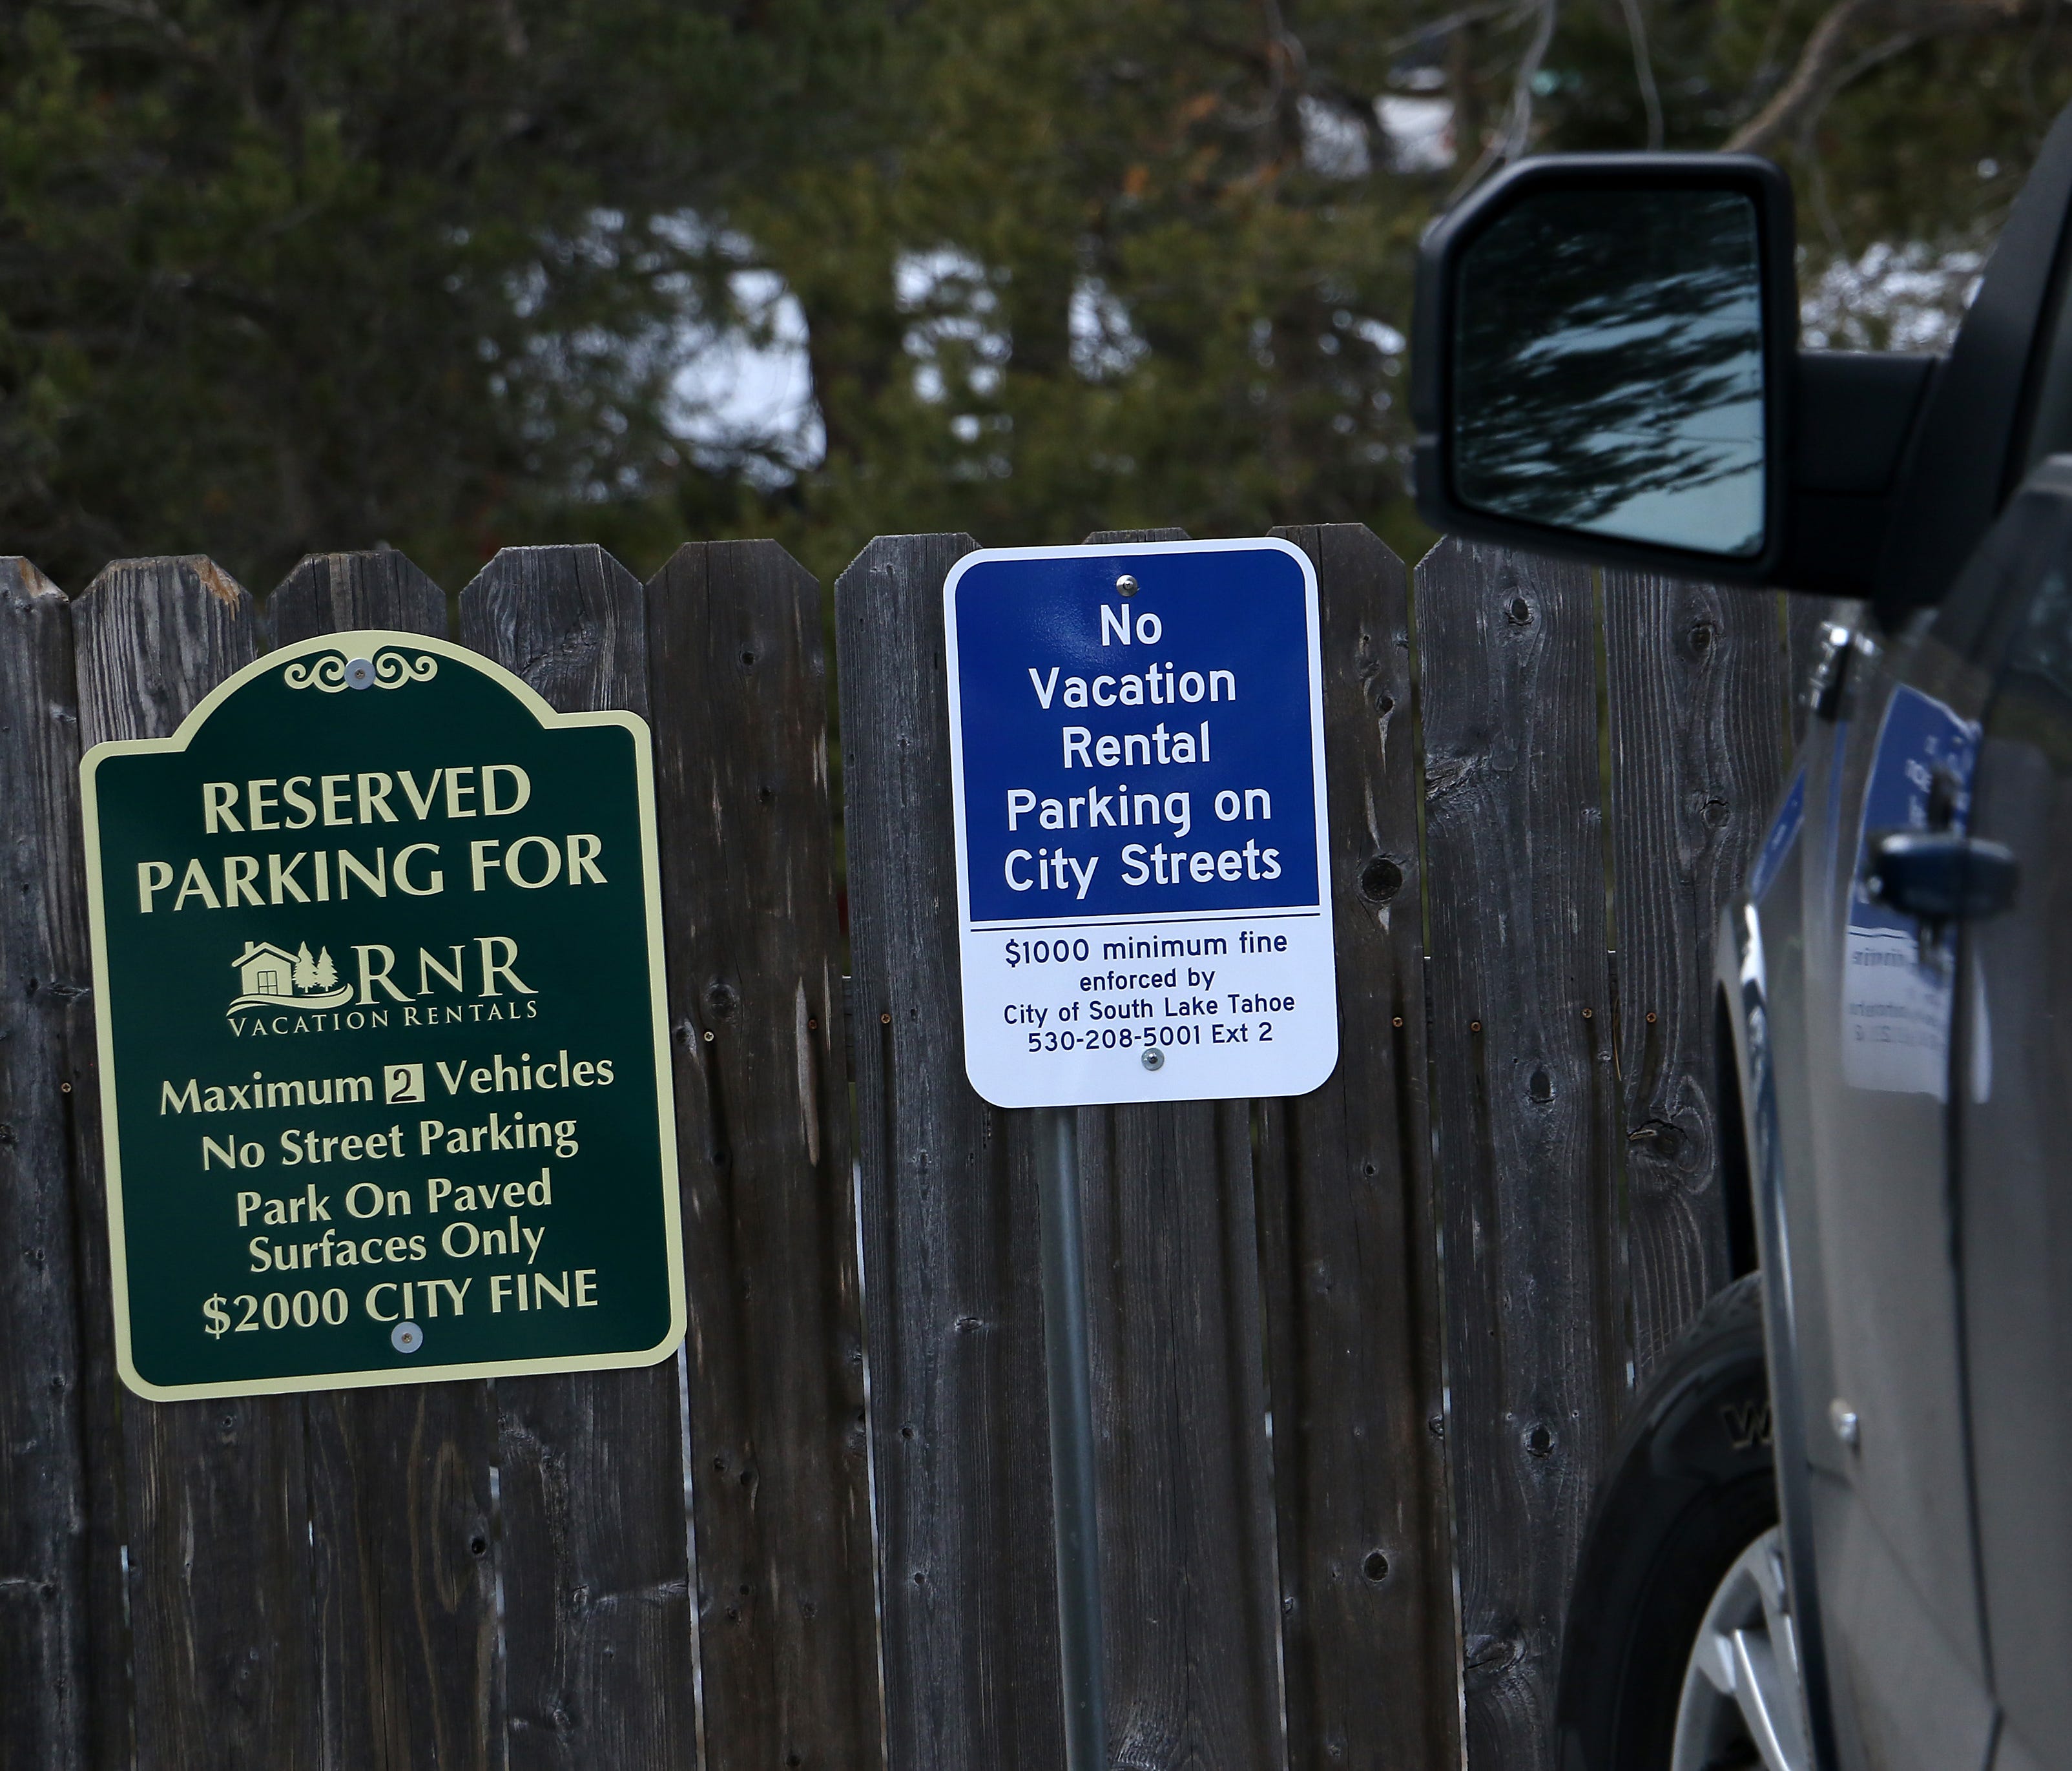 Parking restriction signs are seen at one of RnR Vacation Rentals' properties in South Lake Tahoe on Feb. 20, 2018.